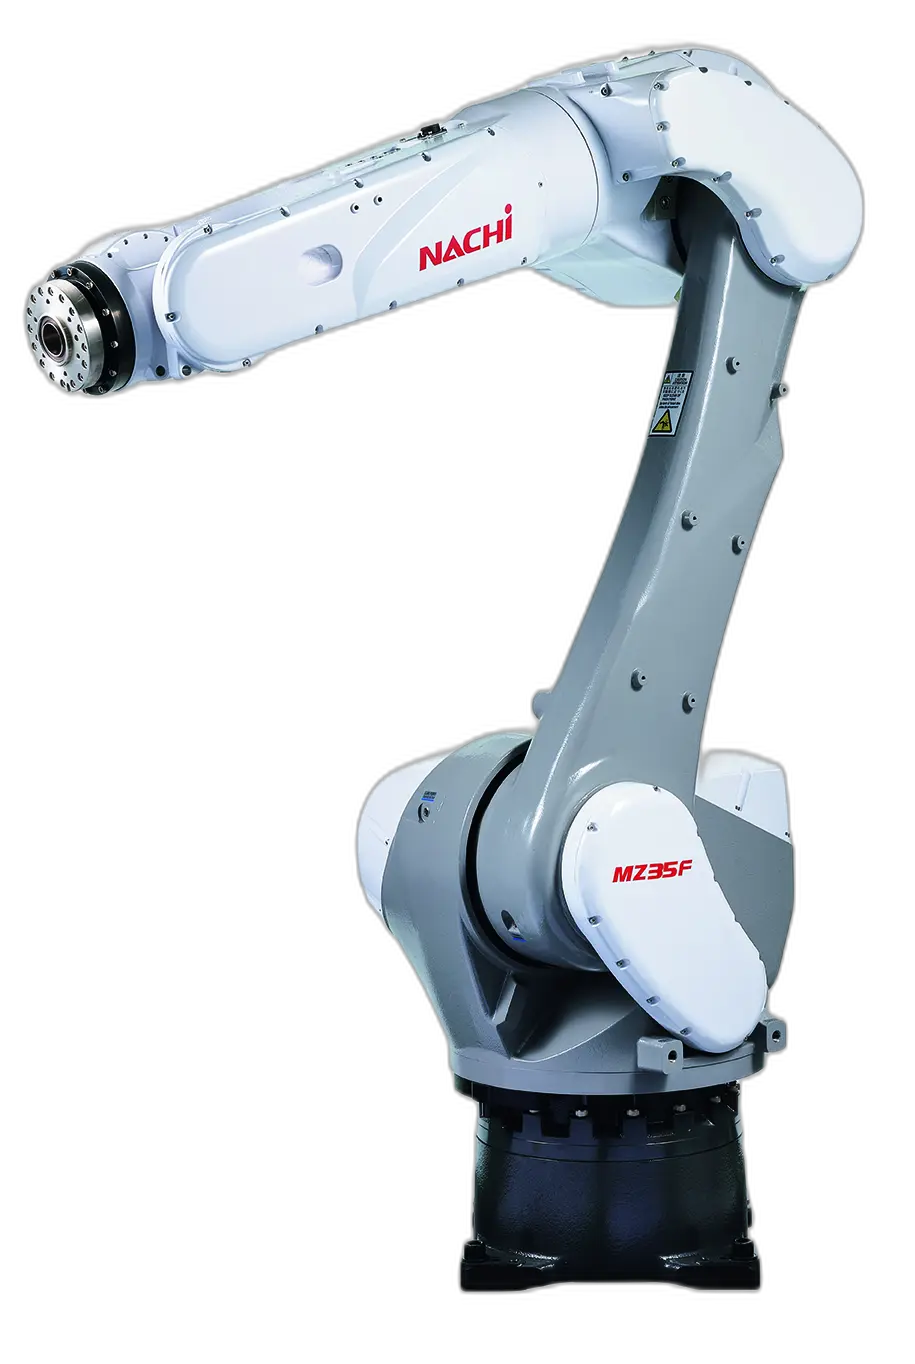 The New MZ35F from Nachi